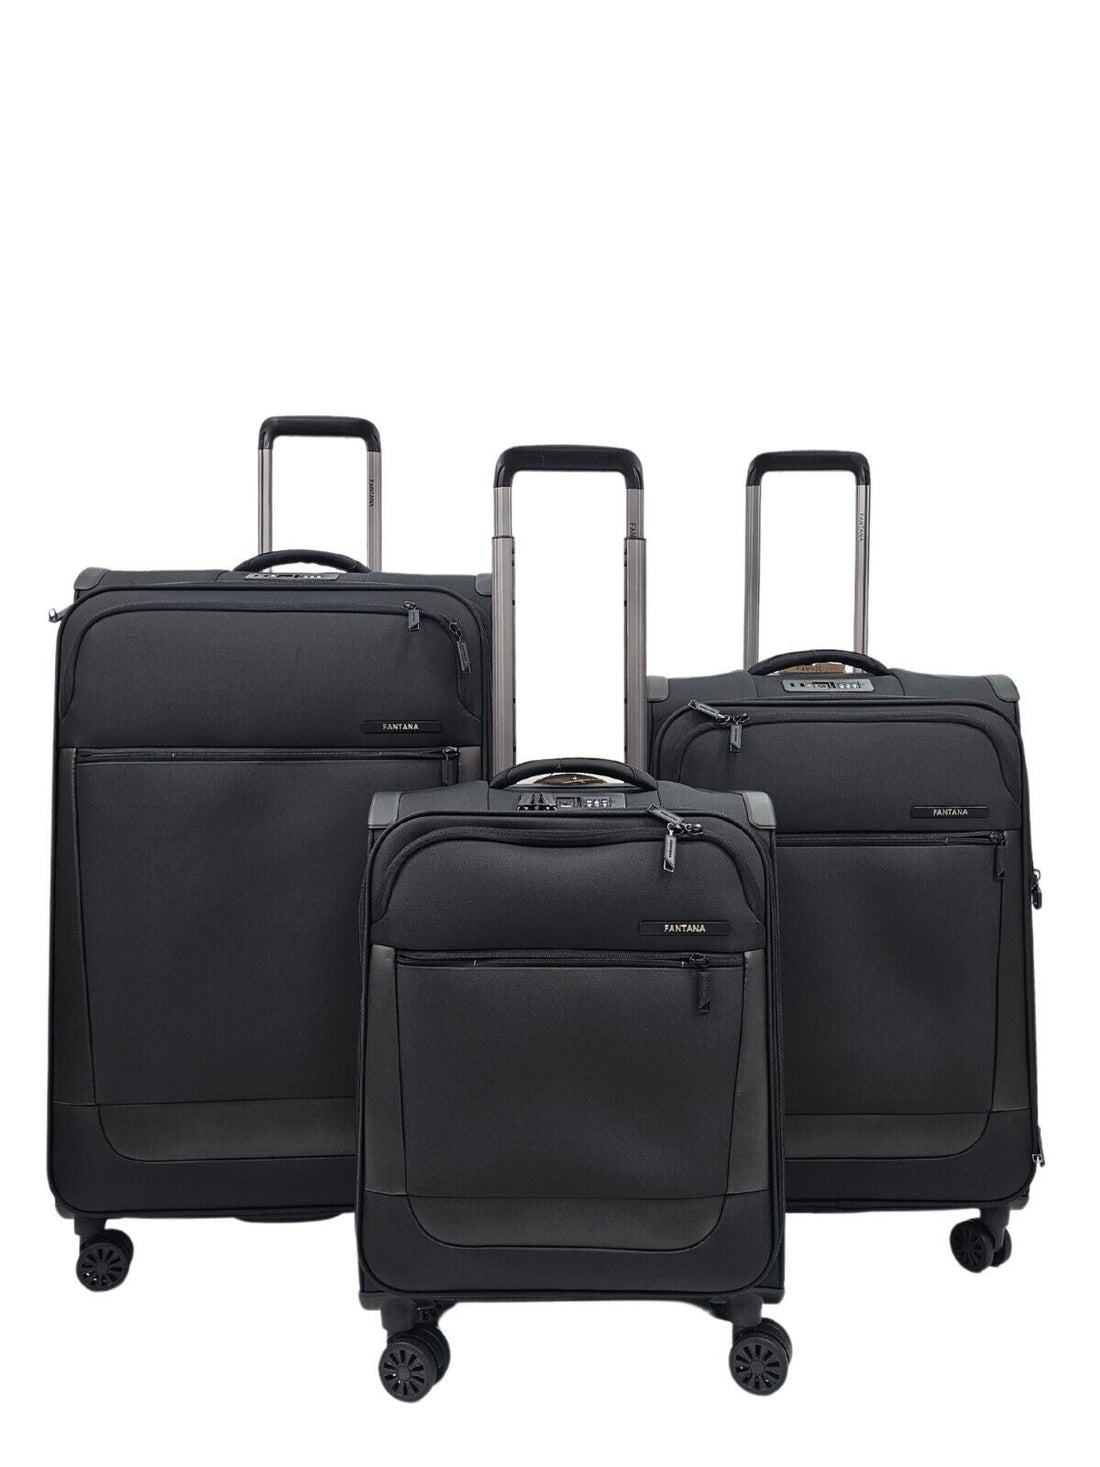 Lightweight Black Suitcases 4 Wheel Luggage Travel Cabin Bag - Upperclass Fashions 